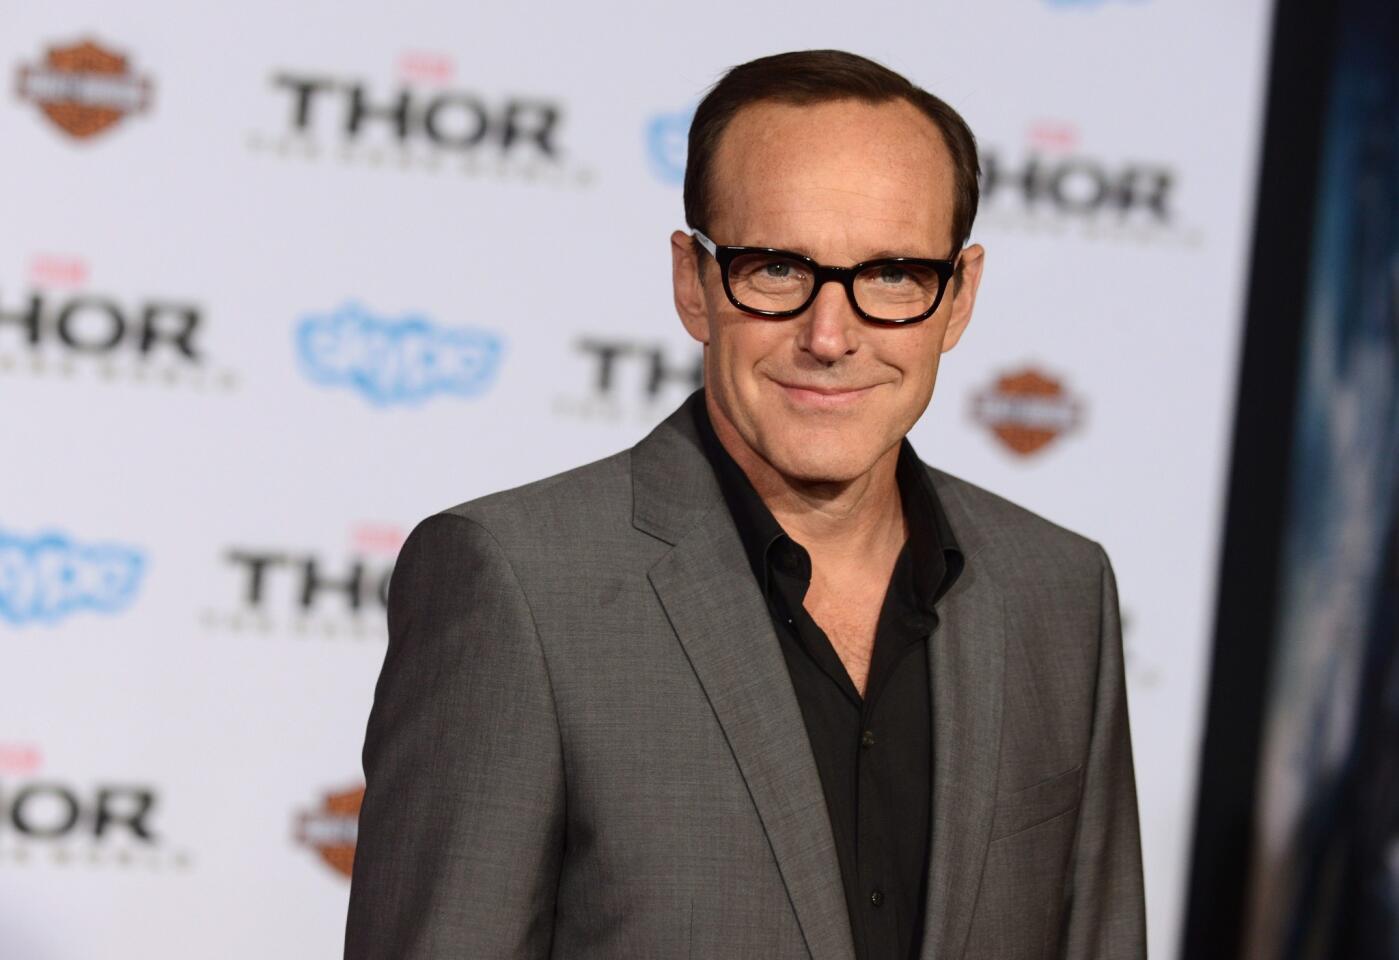 "'As we let our own light shine, we unconsciously give other people permission to do the same. As we are liberated from our own fear ... our presence automatically liberates others.' Rest In Peace Nelson Mandela" — @clarkgregg